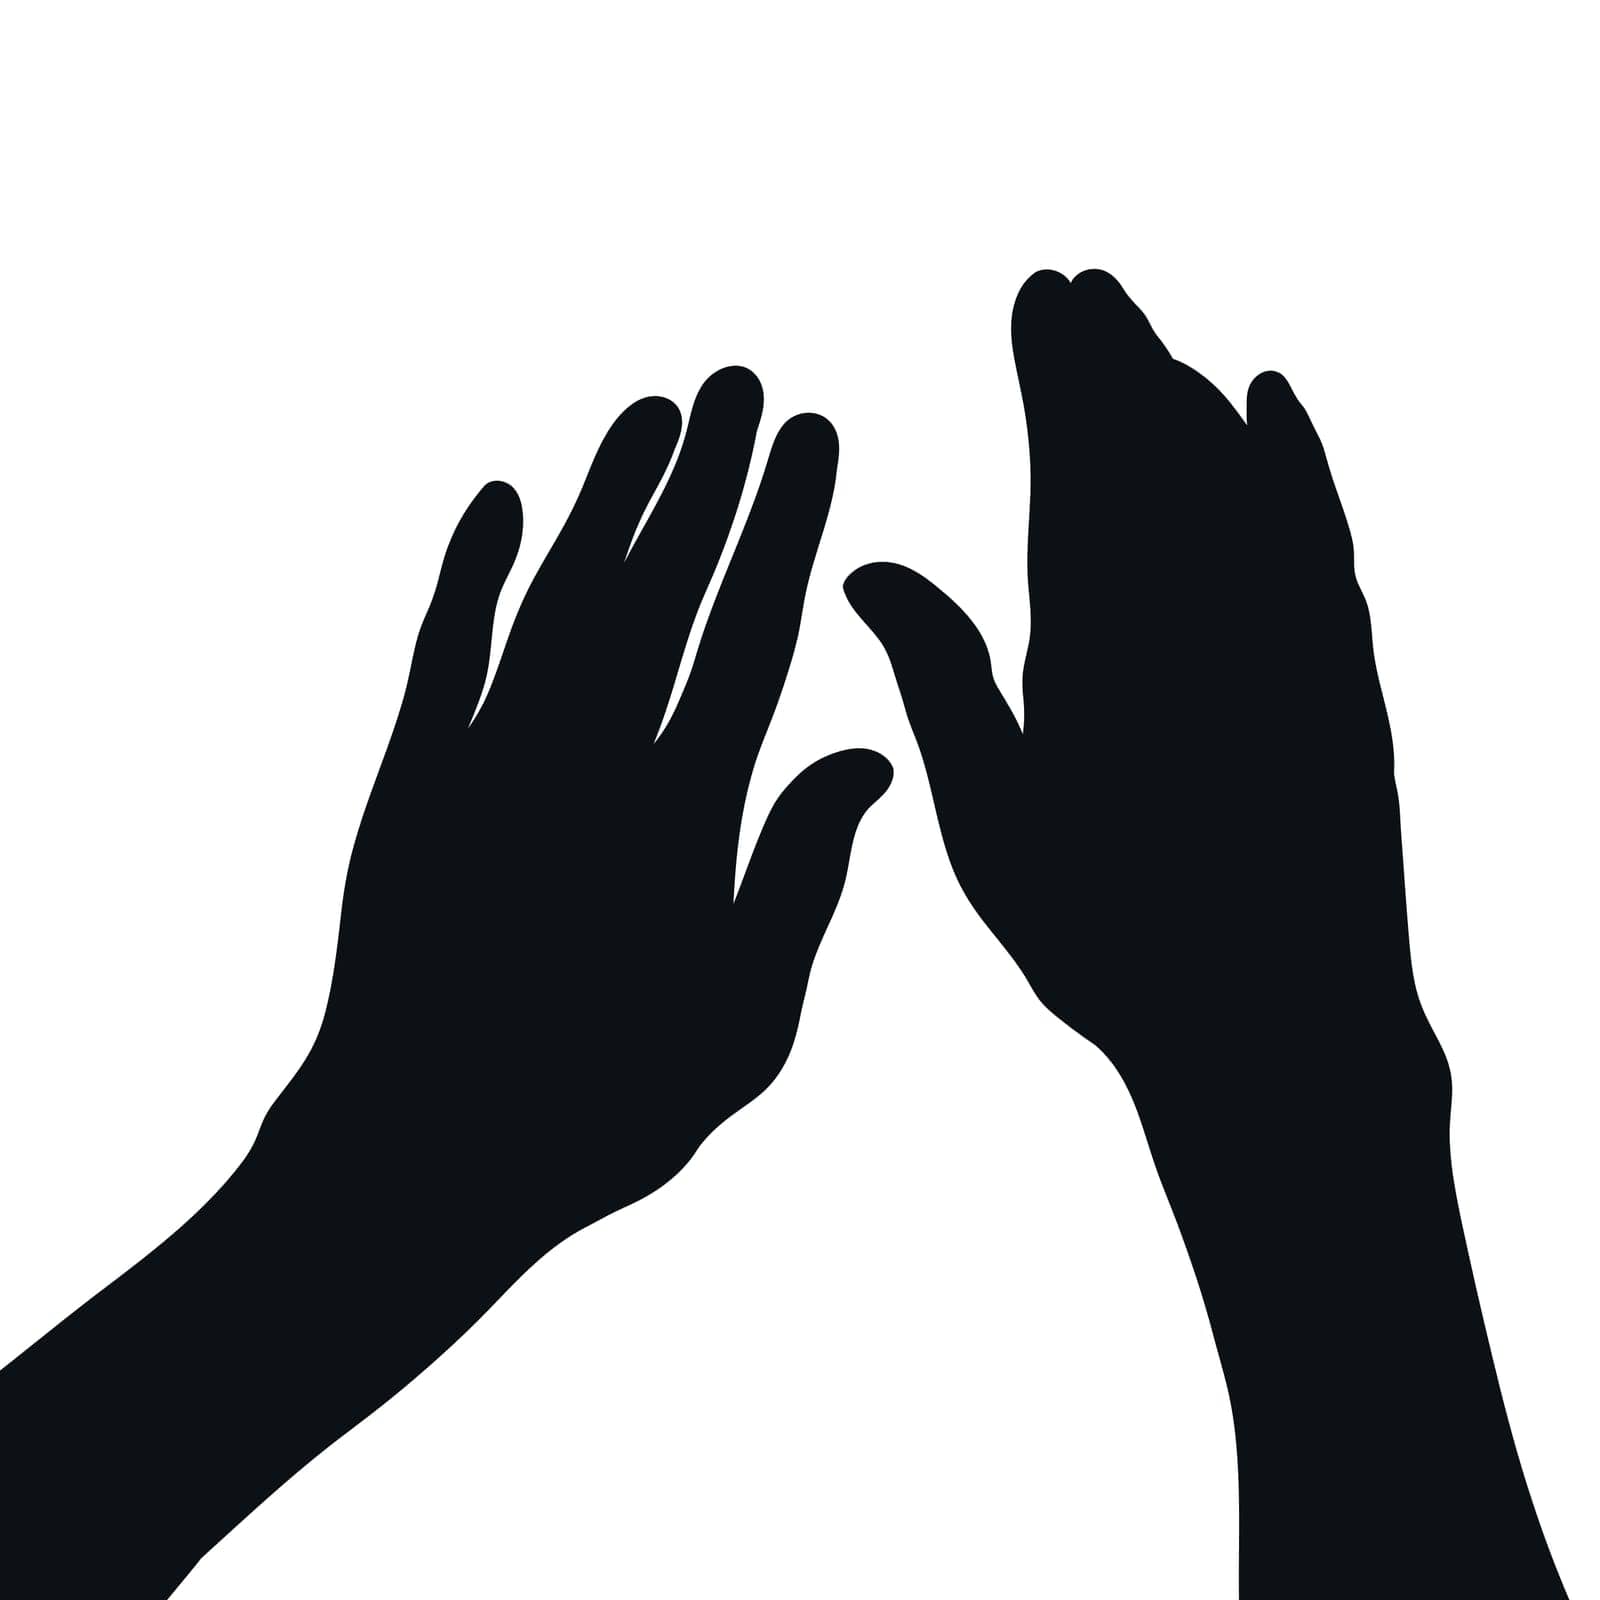 Silhouette of Hands stroking the surface. Human hands silhouette. Vector illustration